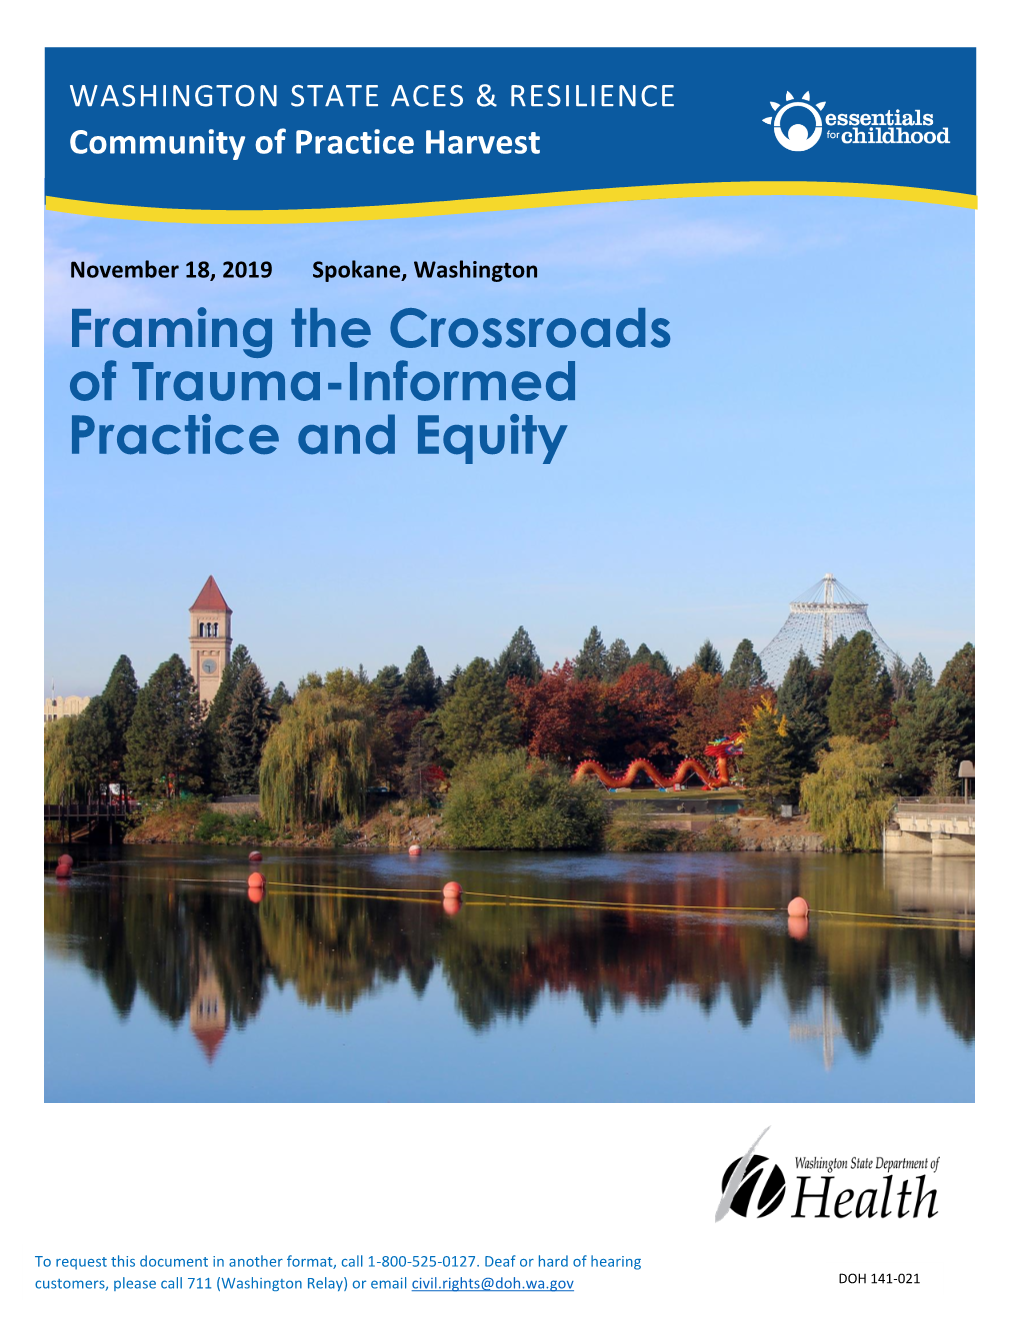 Framing the Crossroads of Trauma-Informed Practice and Equity